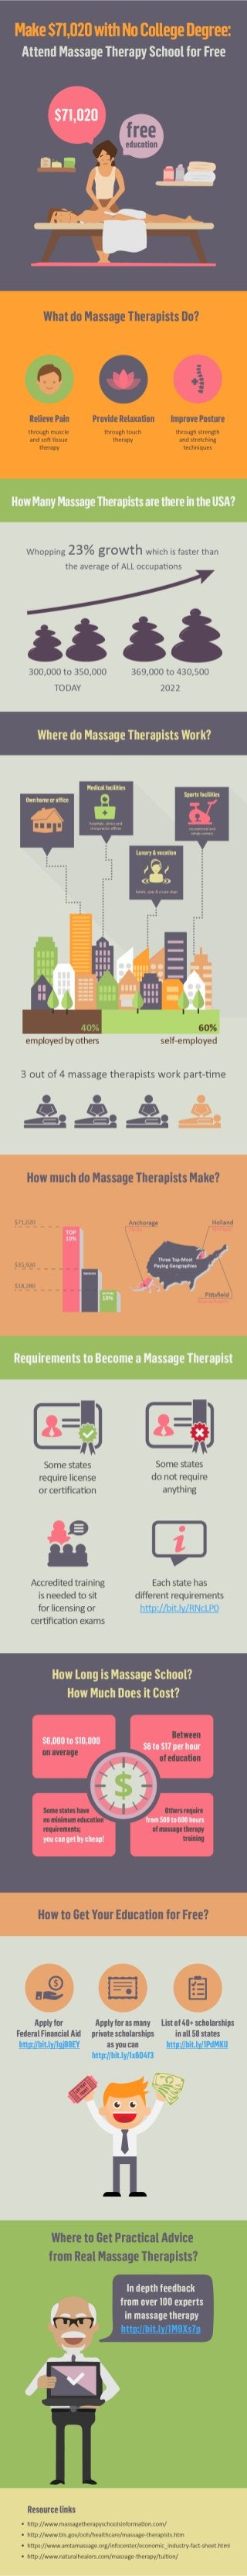  Make $71,020 with No College Degree: Attend Massage Therapy School for Free